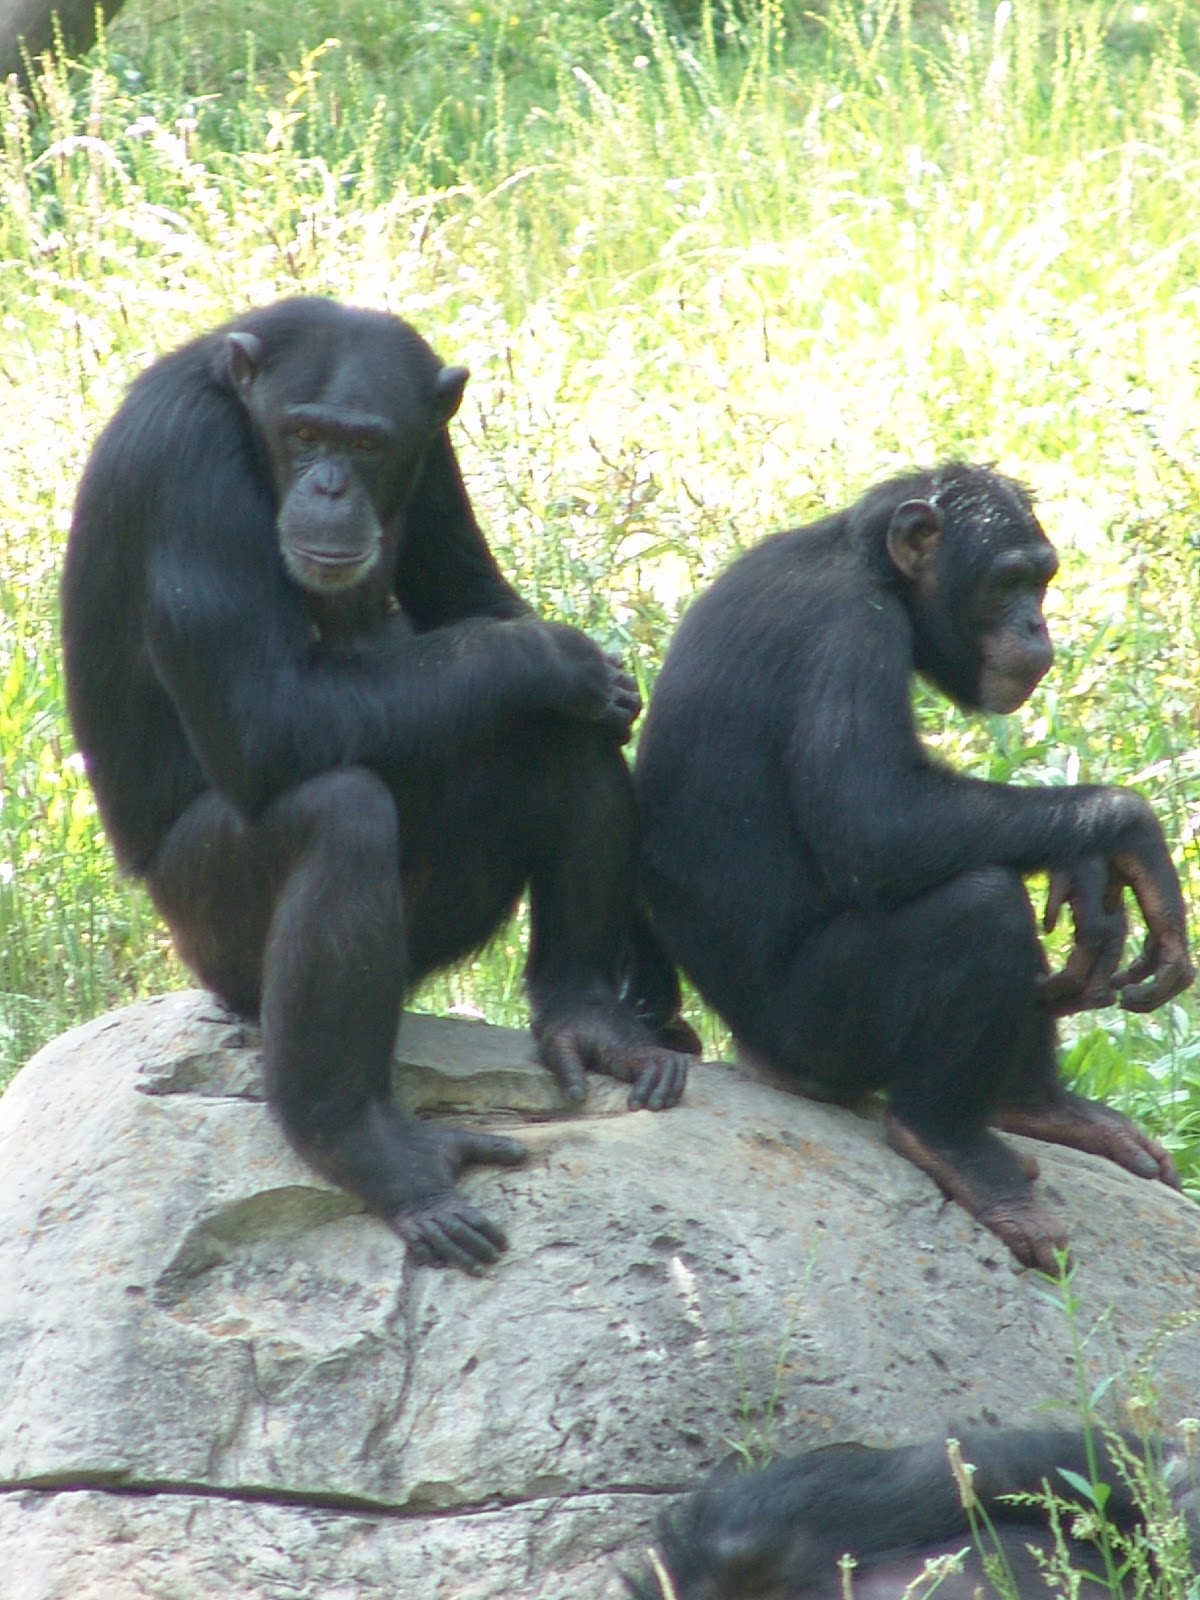 ENCYCLOPEDIA OF ANIMAL FACTS AND PICTURES: CHIMPANZEE1200 x 1600